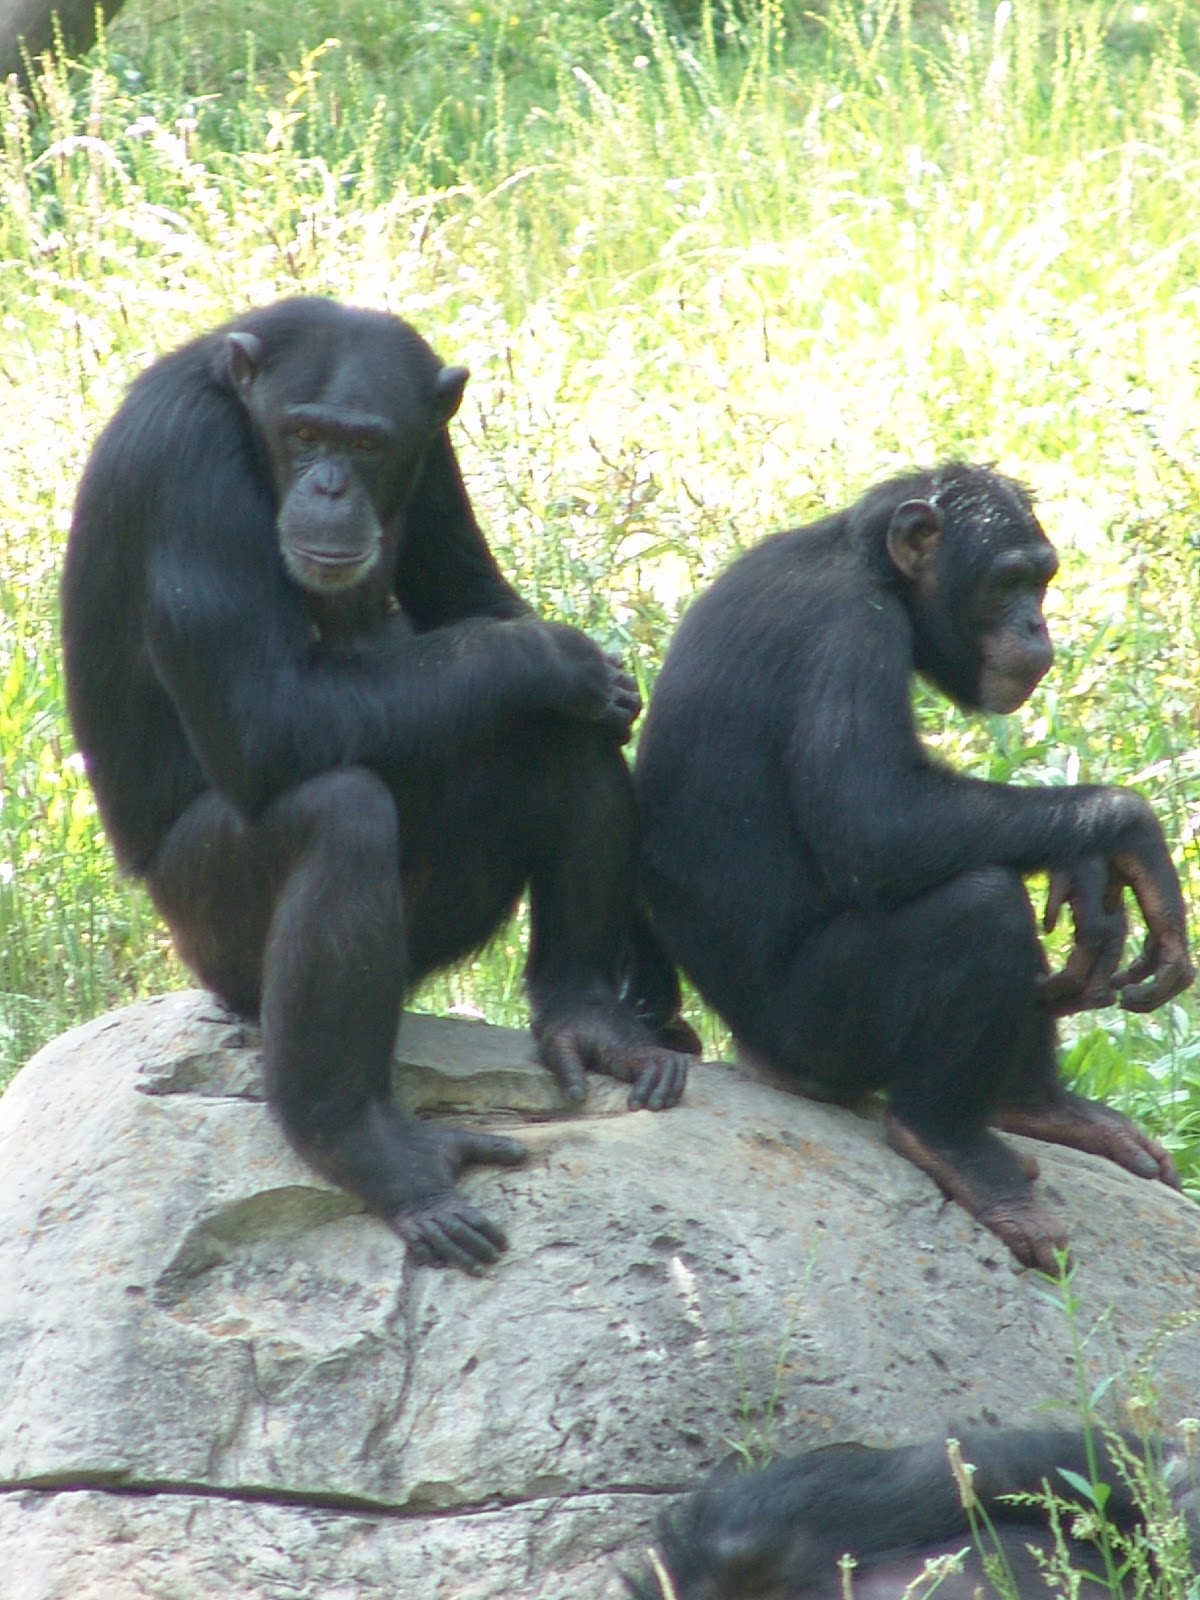 ENCYCLOPEDIA OF ANIMAL FACTS AND PICTURES: CHIMPANZEE1200 x 1600